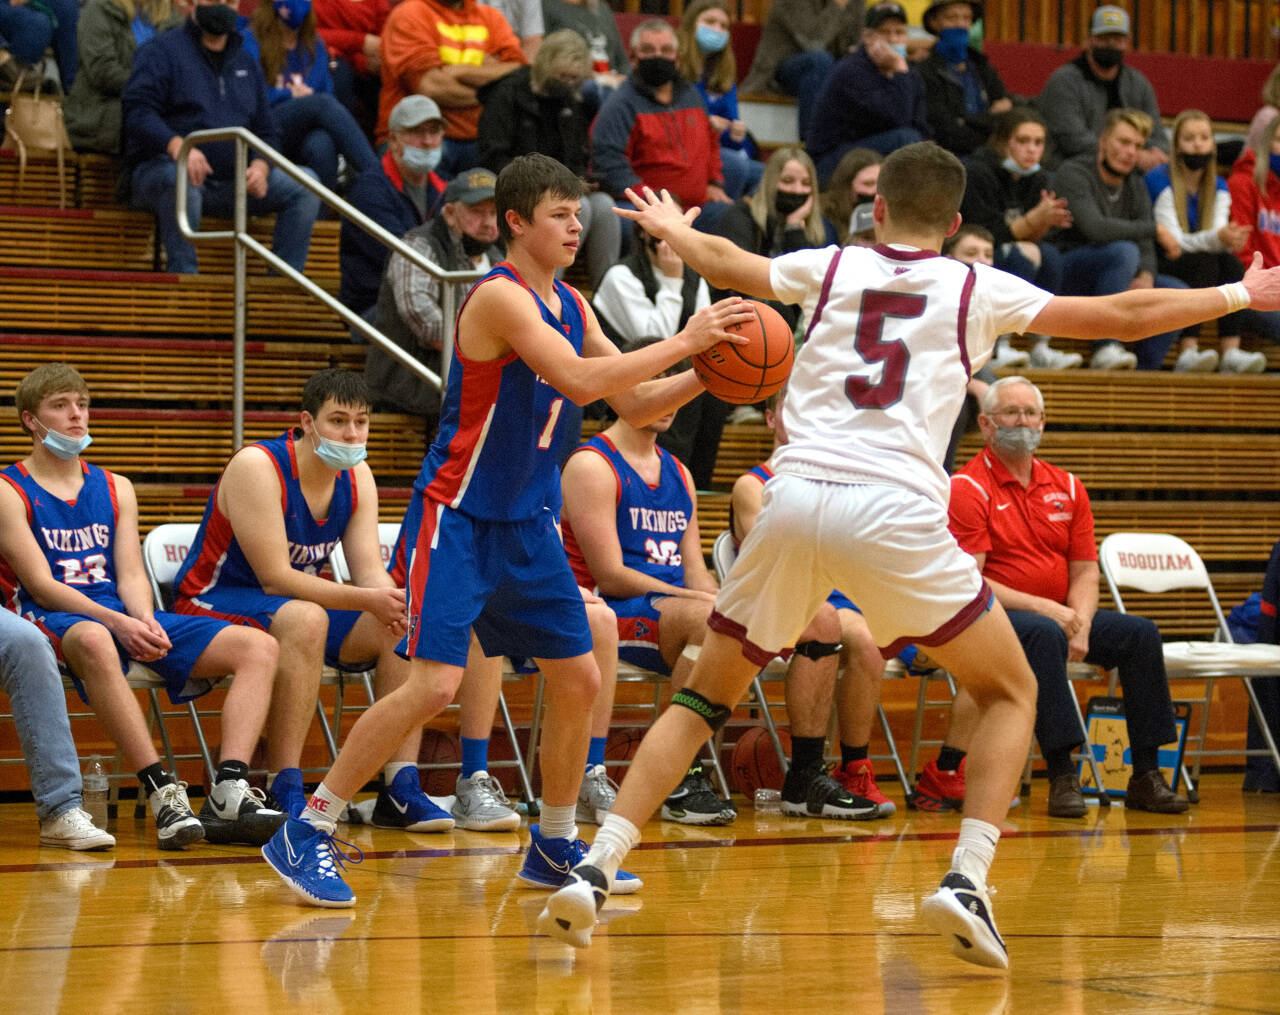 DAILY WORLD FILE PHOTO Willapa Valley guard Kolten Fluke scored a team high 19 points to lead the Vikings to a 56-50 victory over the Naselle Comets on Friday in Naselle.